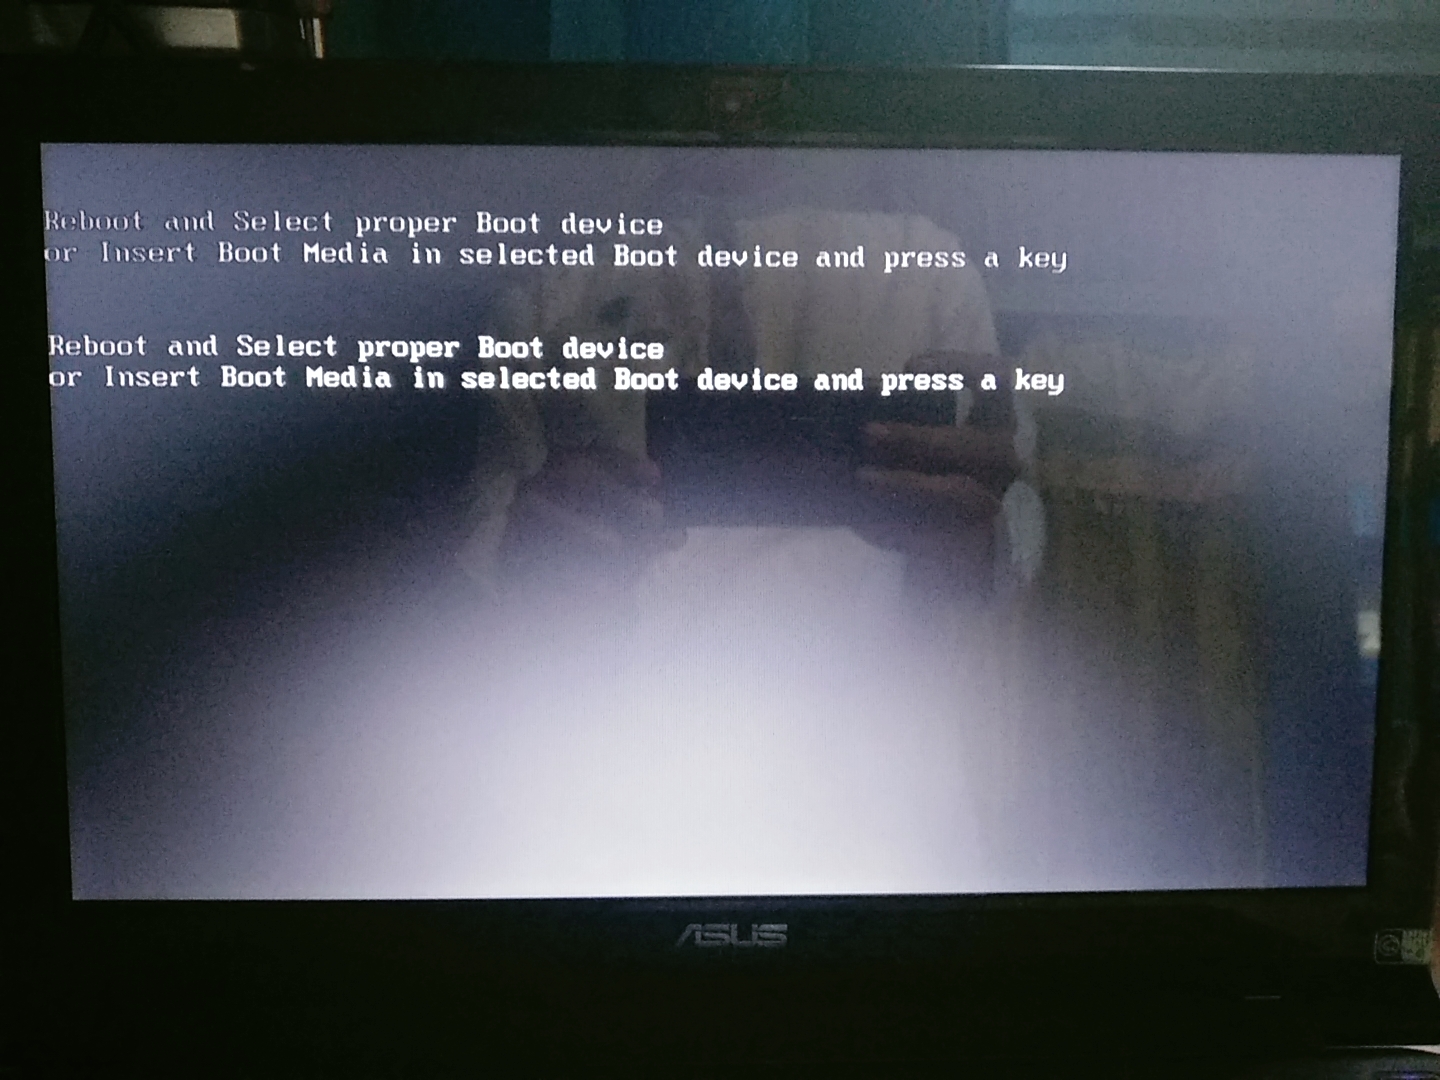 No booting device ноутбук. Boot device ноутбук. Reboot and select proper Boot device. Ошибка Reboot and select proper Boot device. Notebook ASUS Reboot and select proper Boot device.